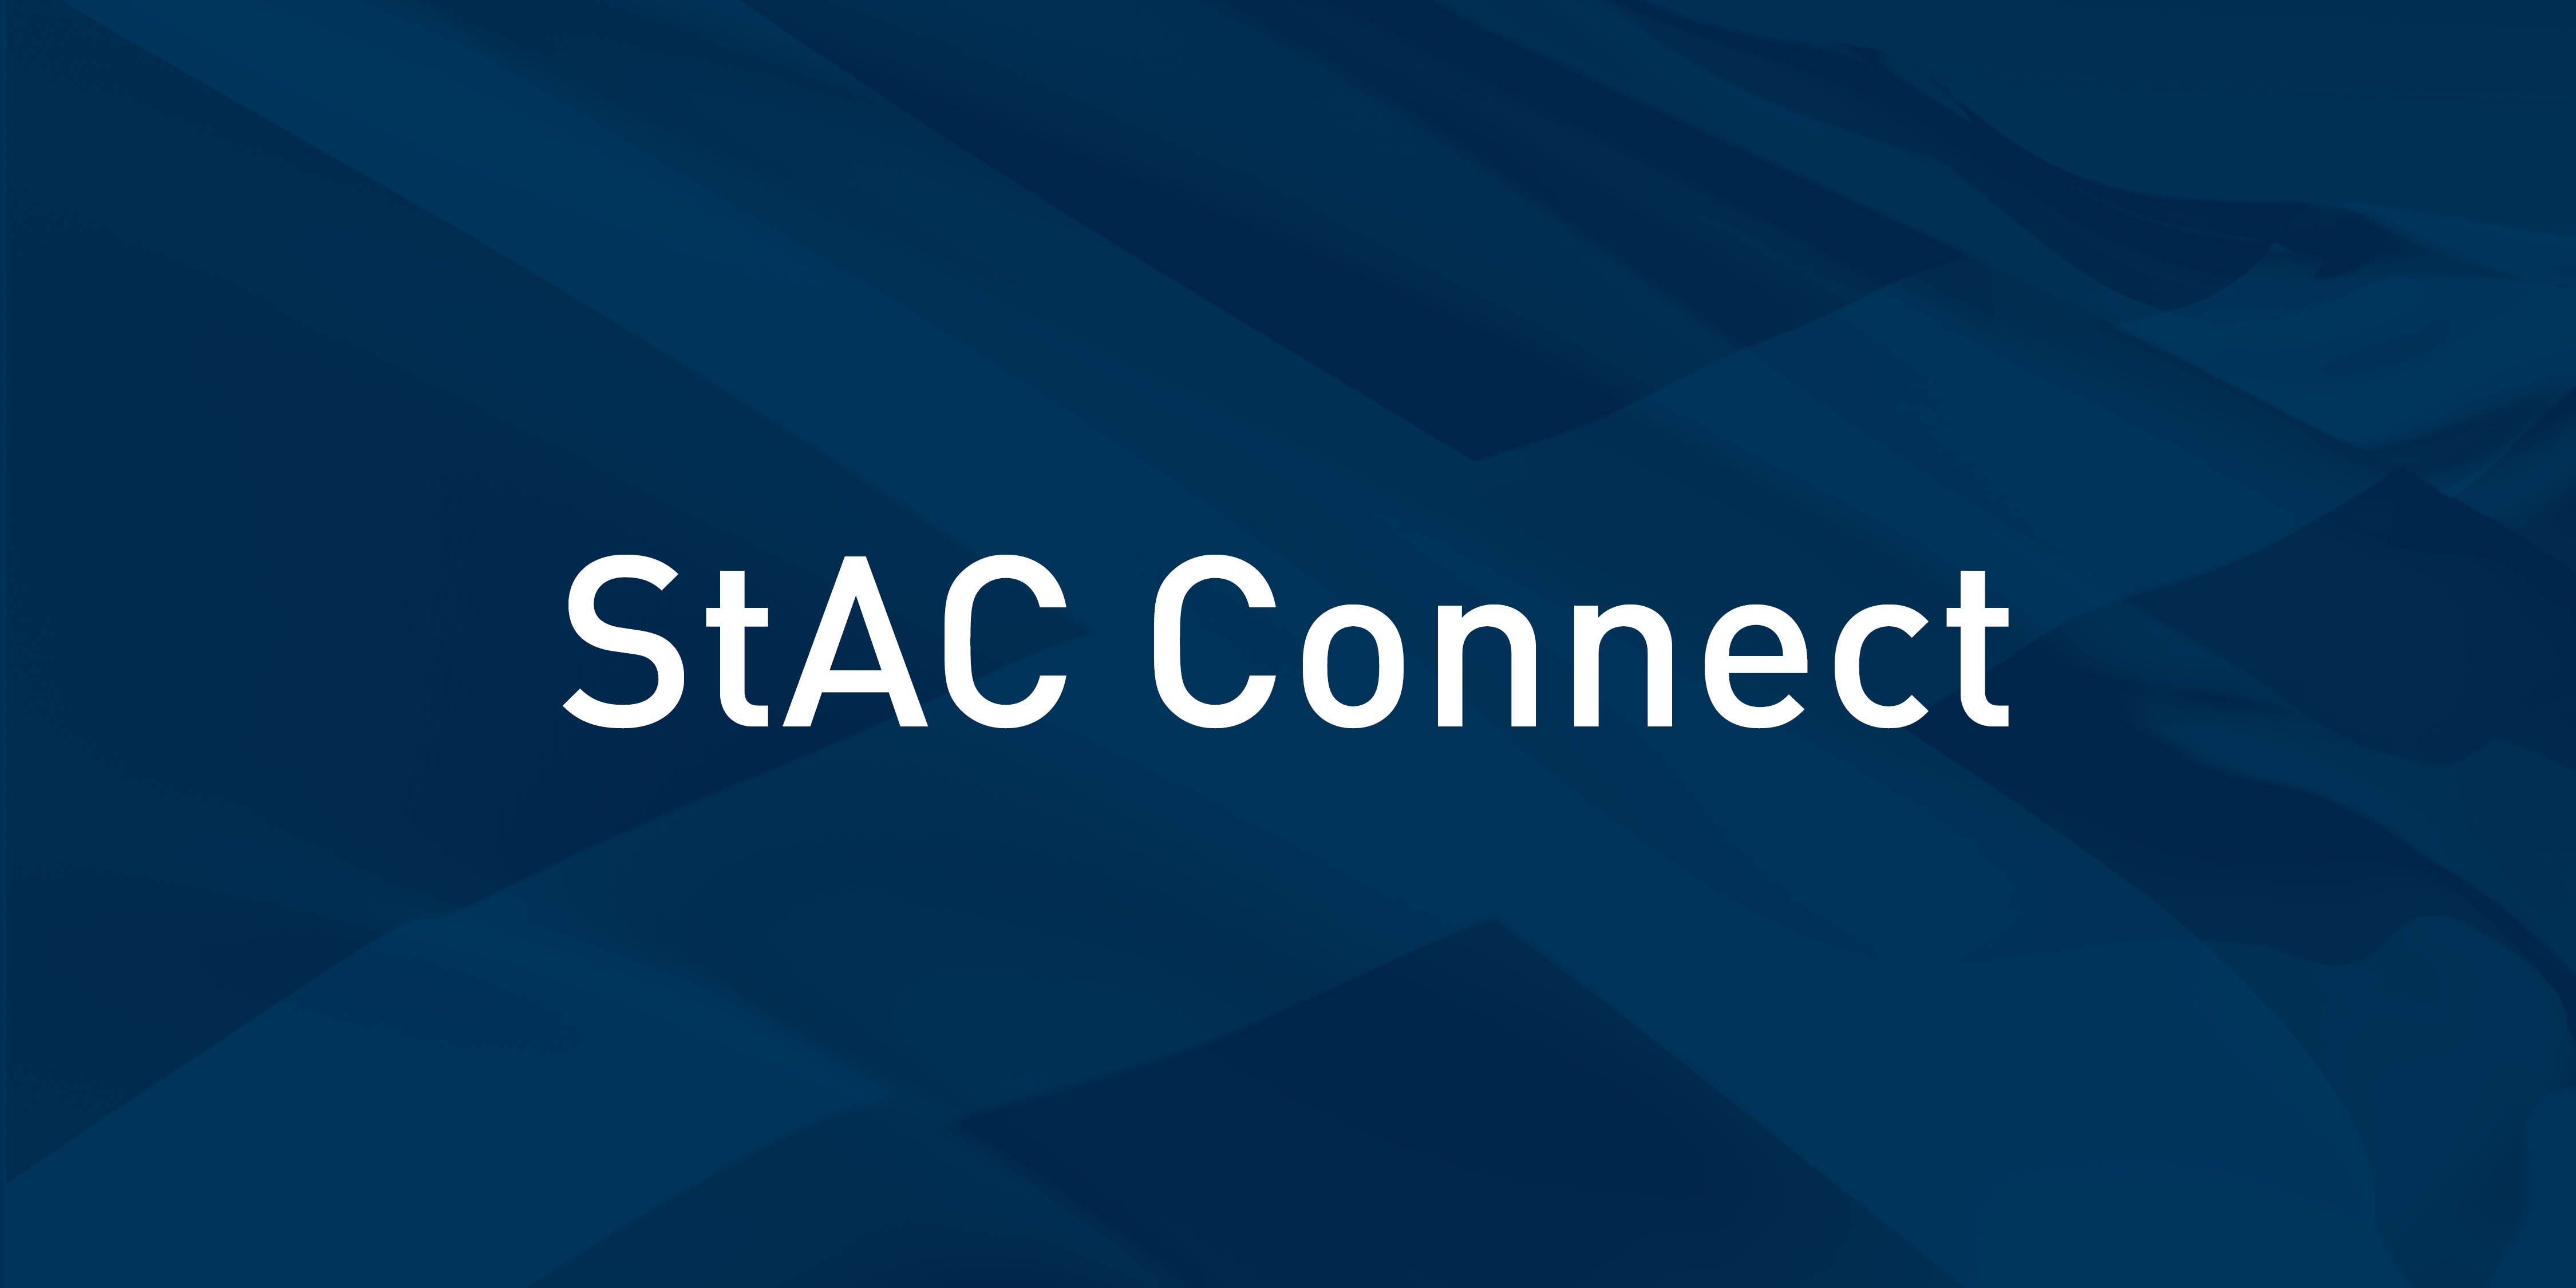 StAC Connect